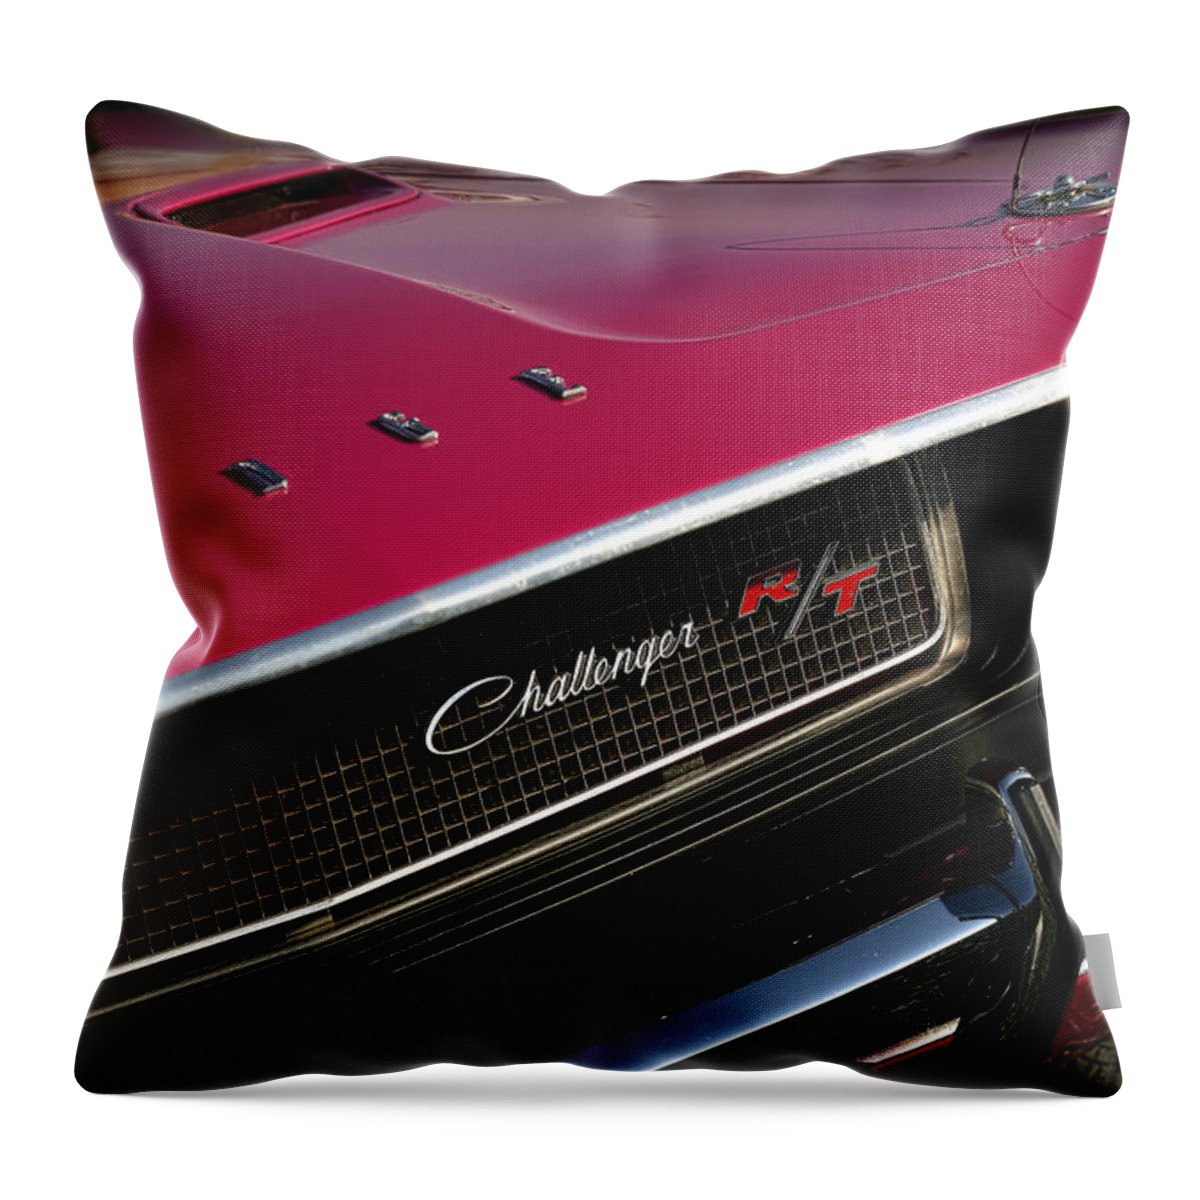 1970 Throw Pillow featuring the photograph Tickled Pink 1970 Dodge Challenger R/T by Gordon Dean II